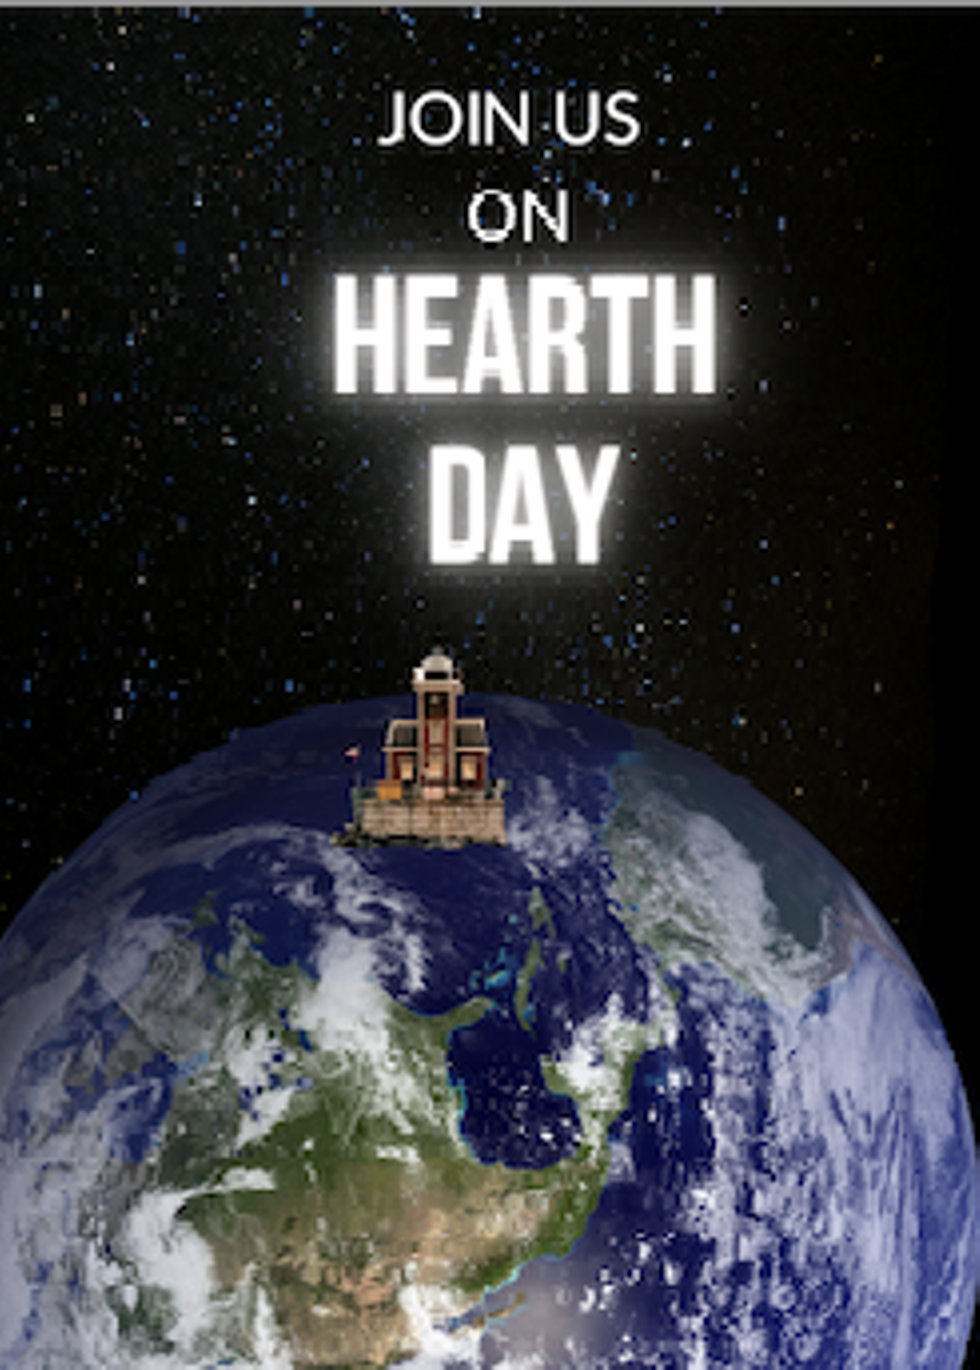 Hudson-Athens Lighthouse supports Hearth Day